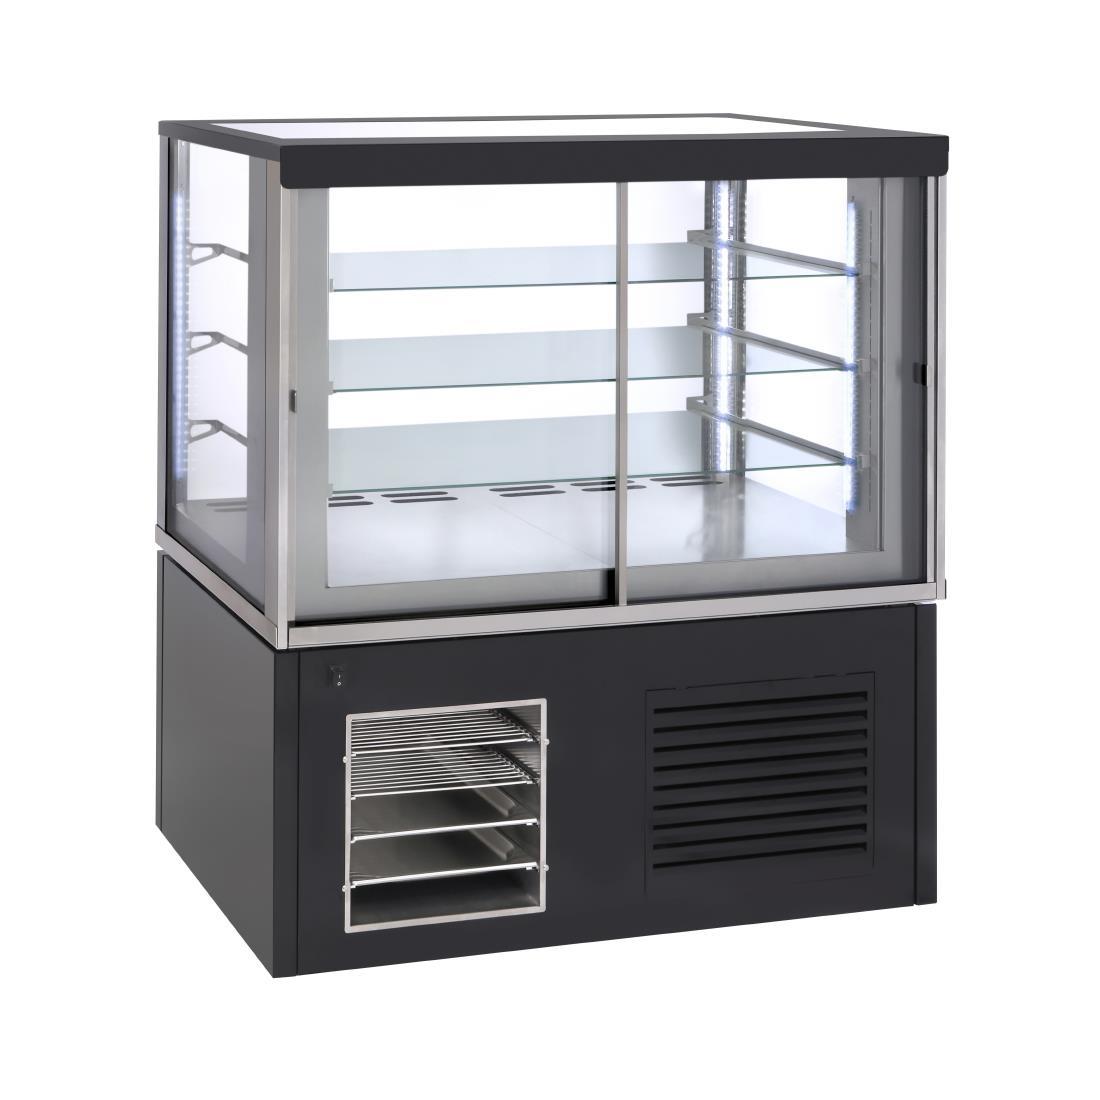 Roller Grill Panoramic Refrigerated Display Cabinet FSC1200 Black